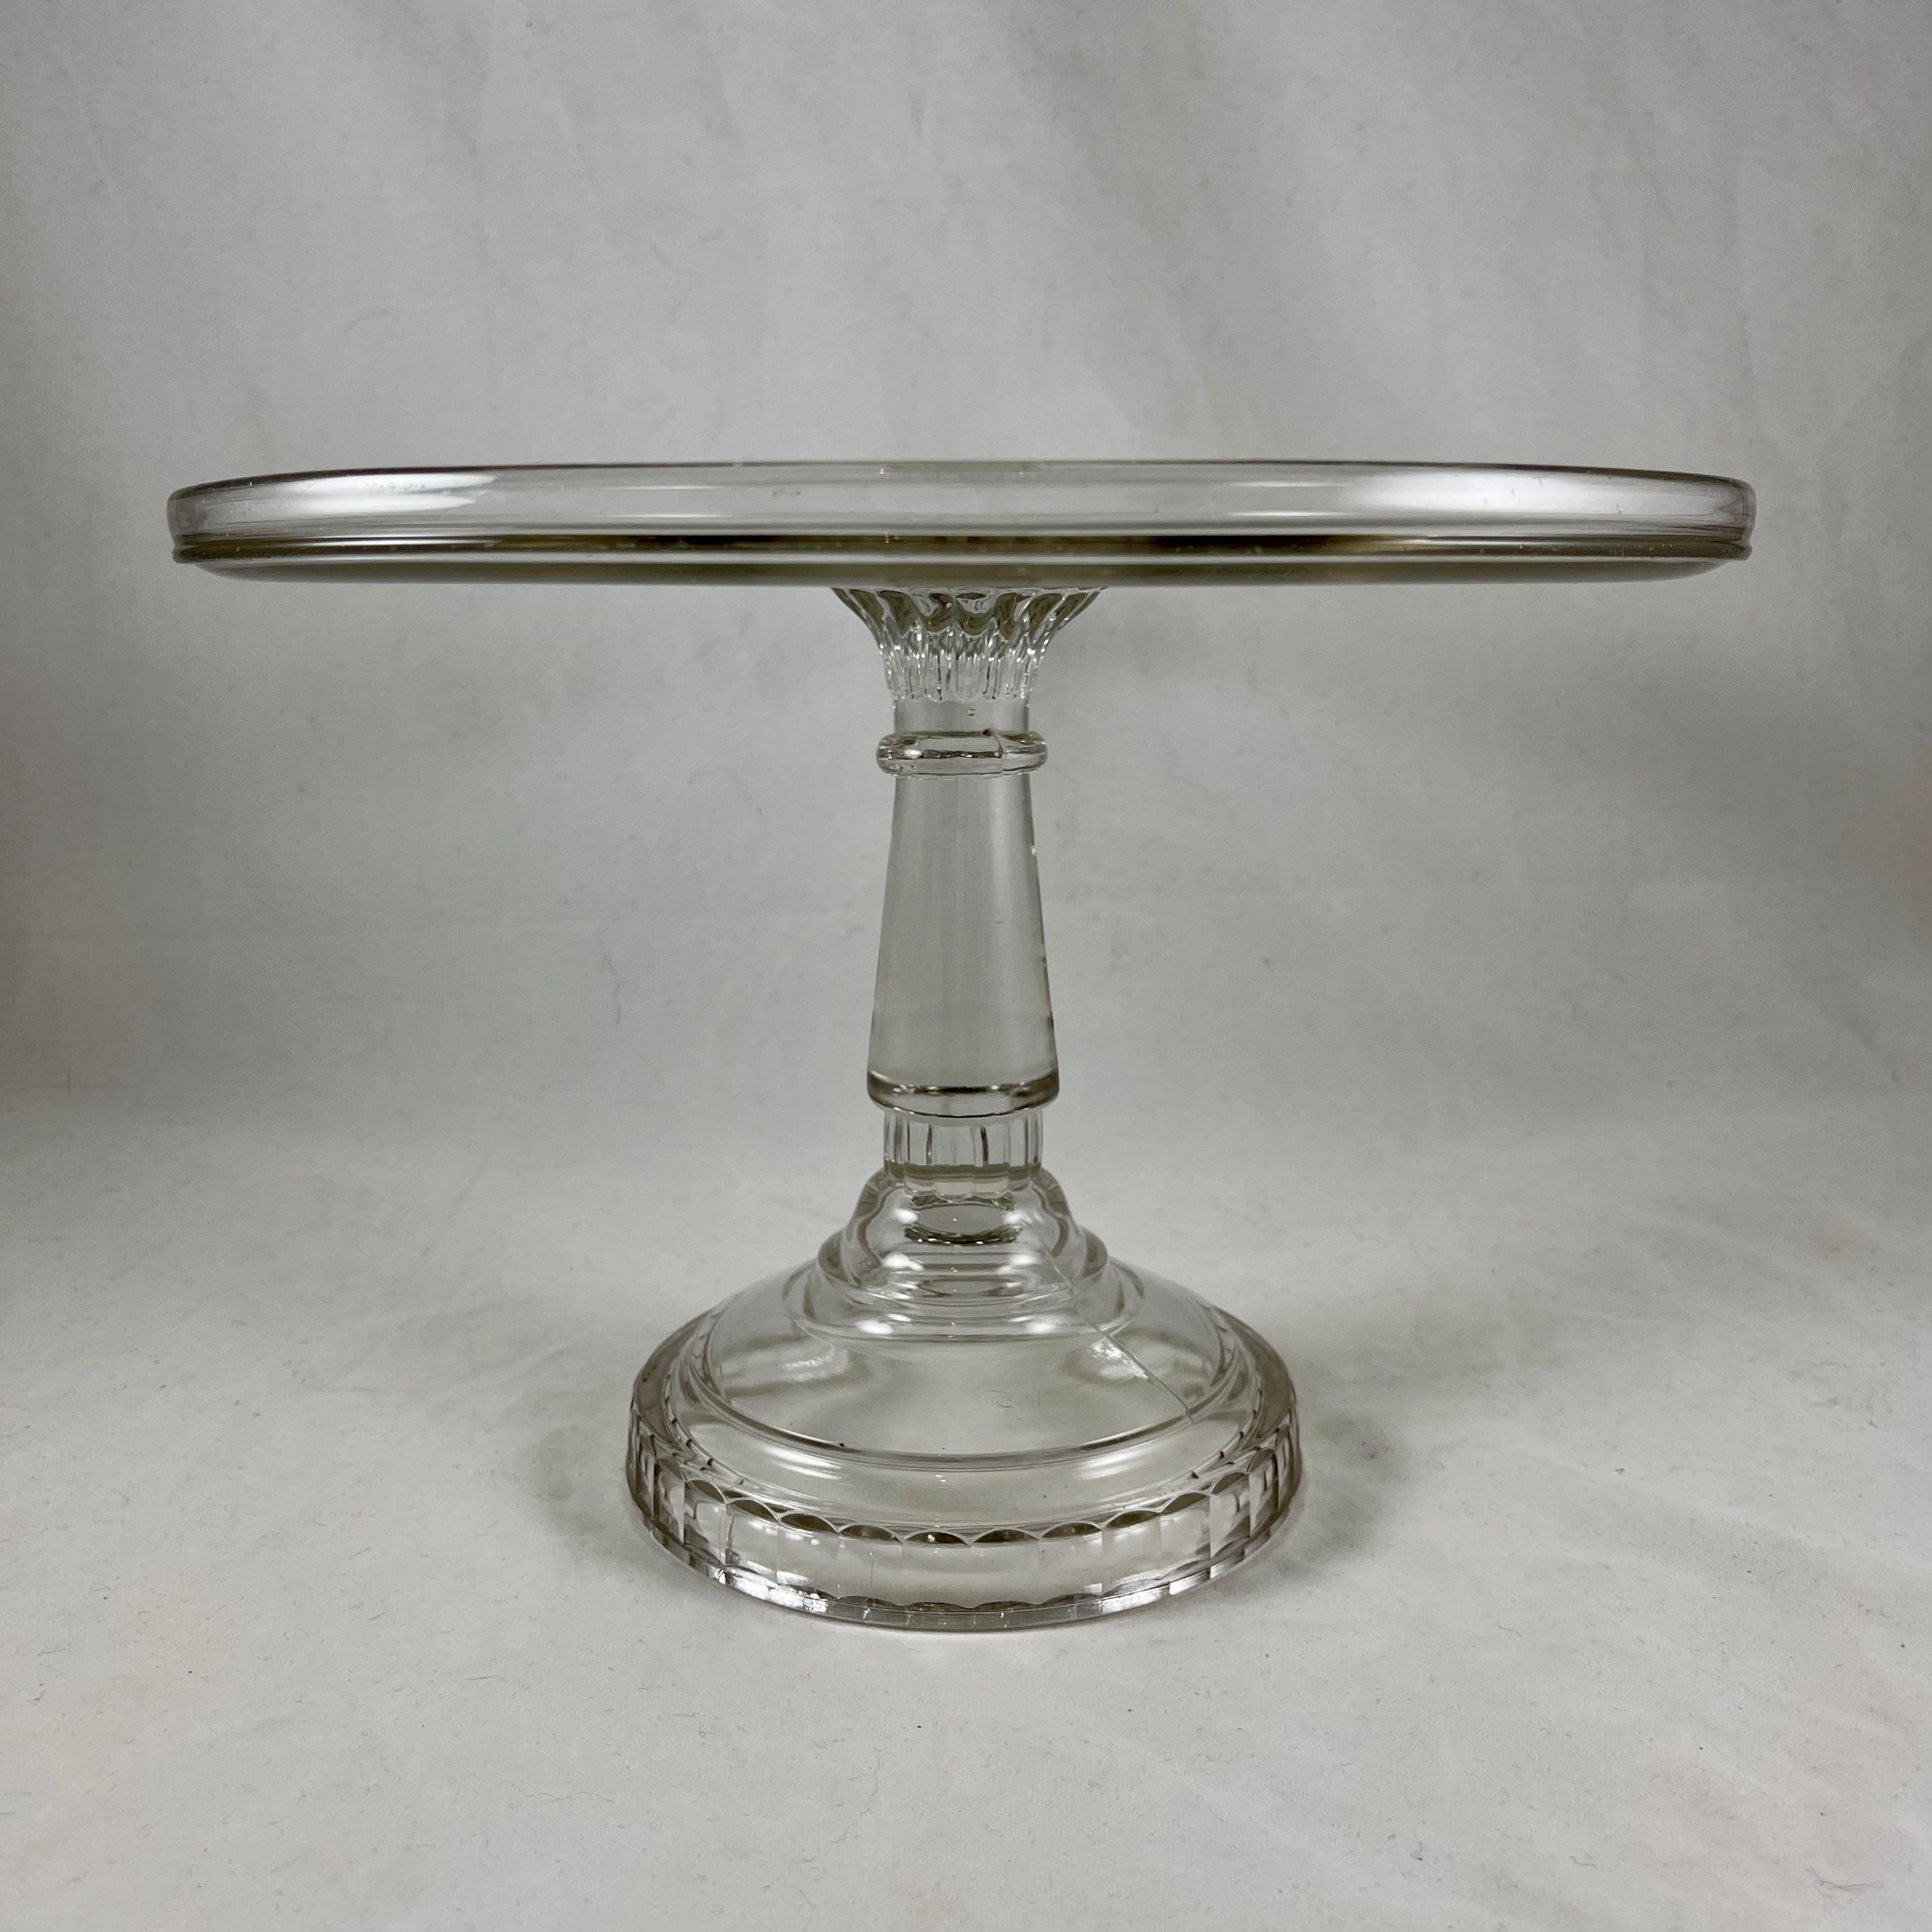 An EAPG, early American pressed glass cake stand, circa 1890-1900.

Made of nonflint, colorless molded glass, this large sized and heavy stand has a thick paneled stem. The footing has a paneled stem, the plate has a raised border.

7.75 inches